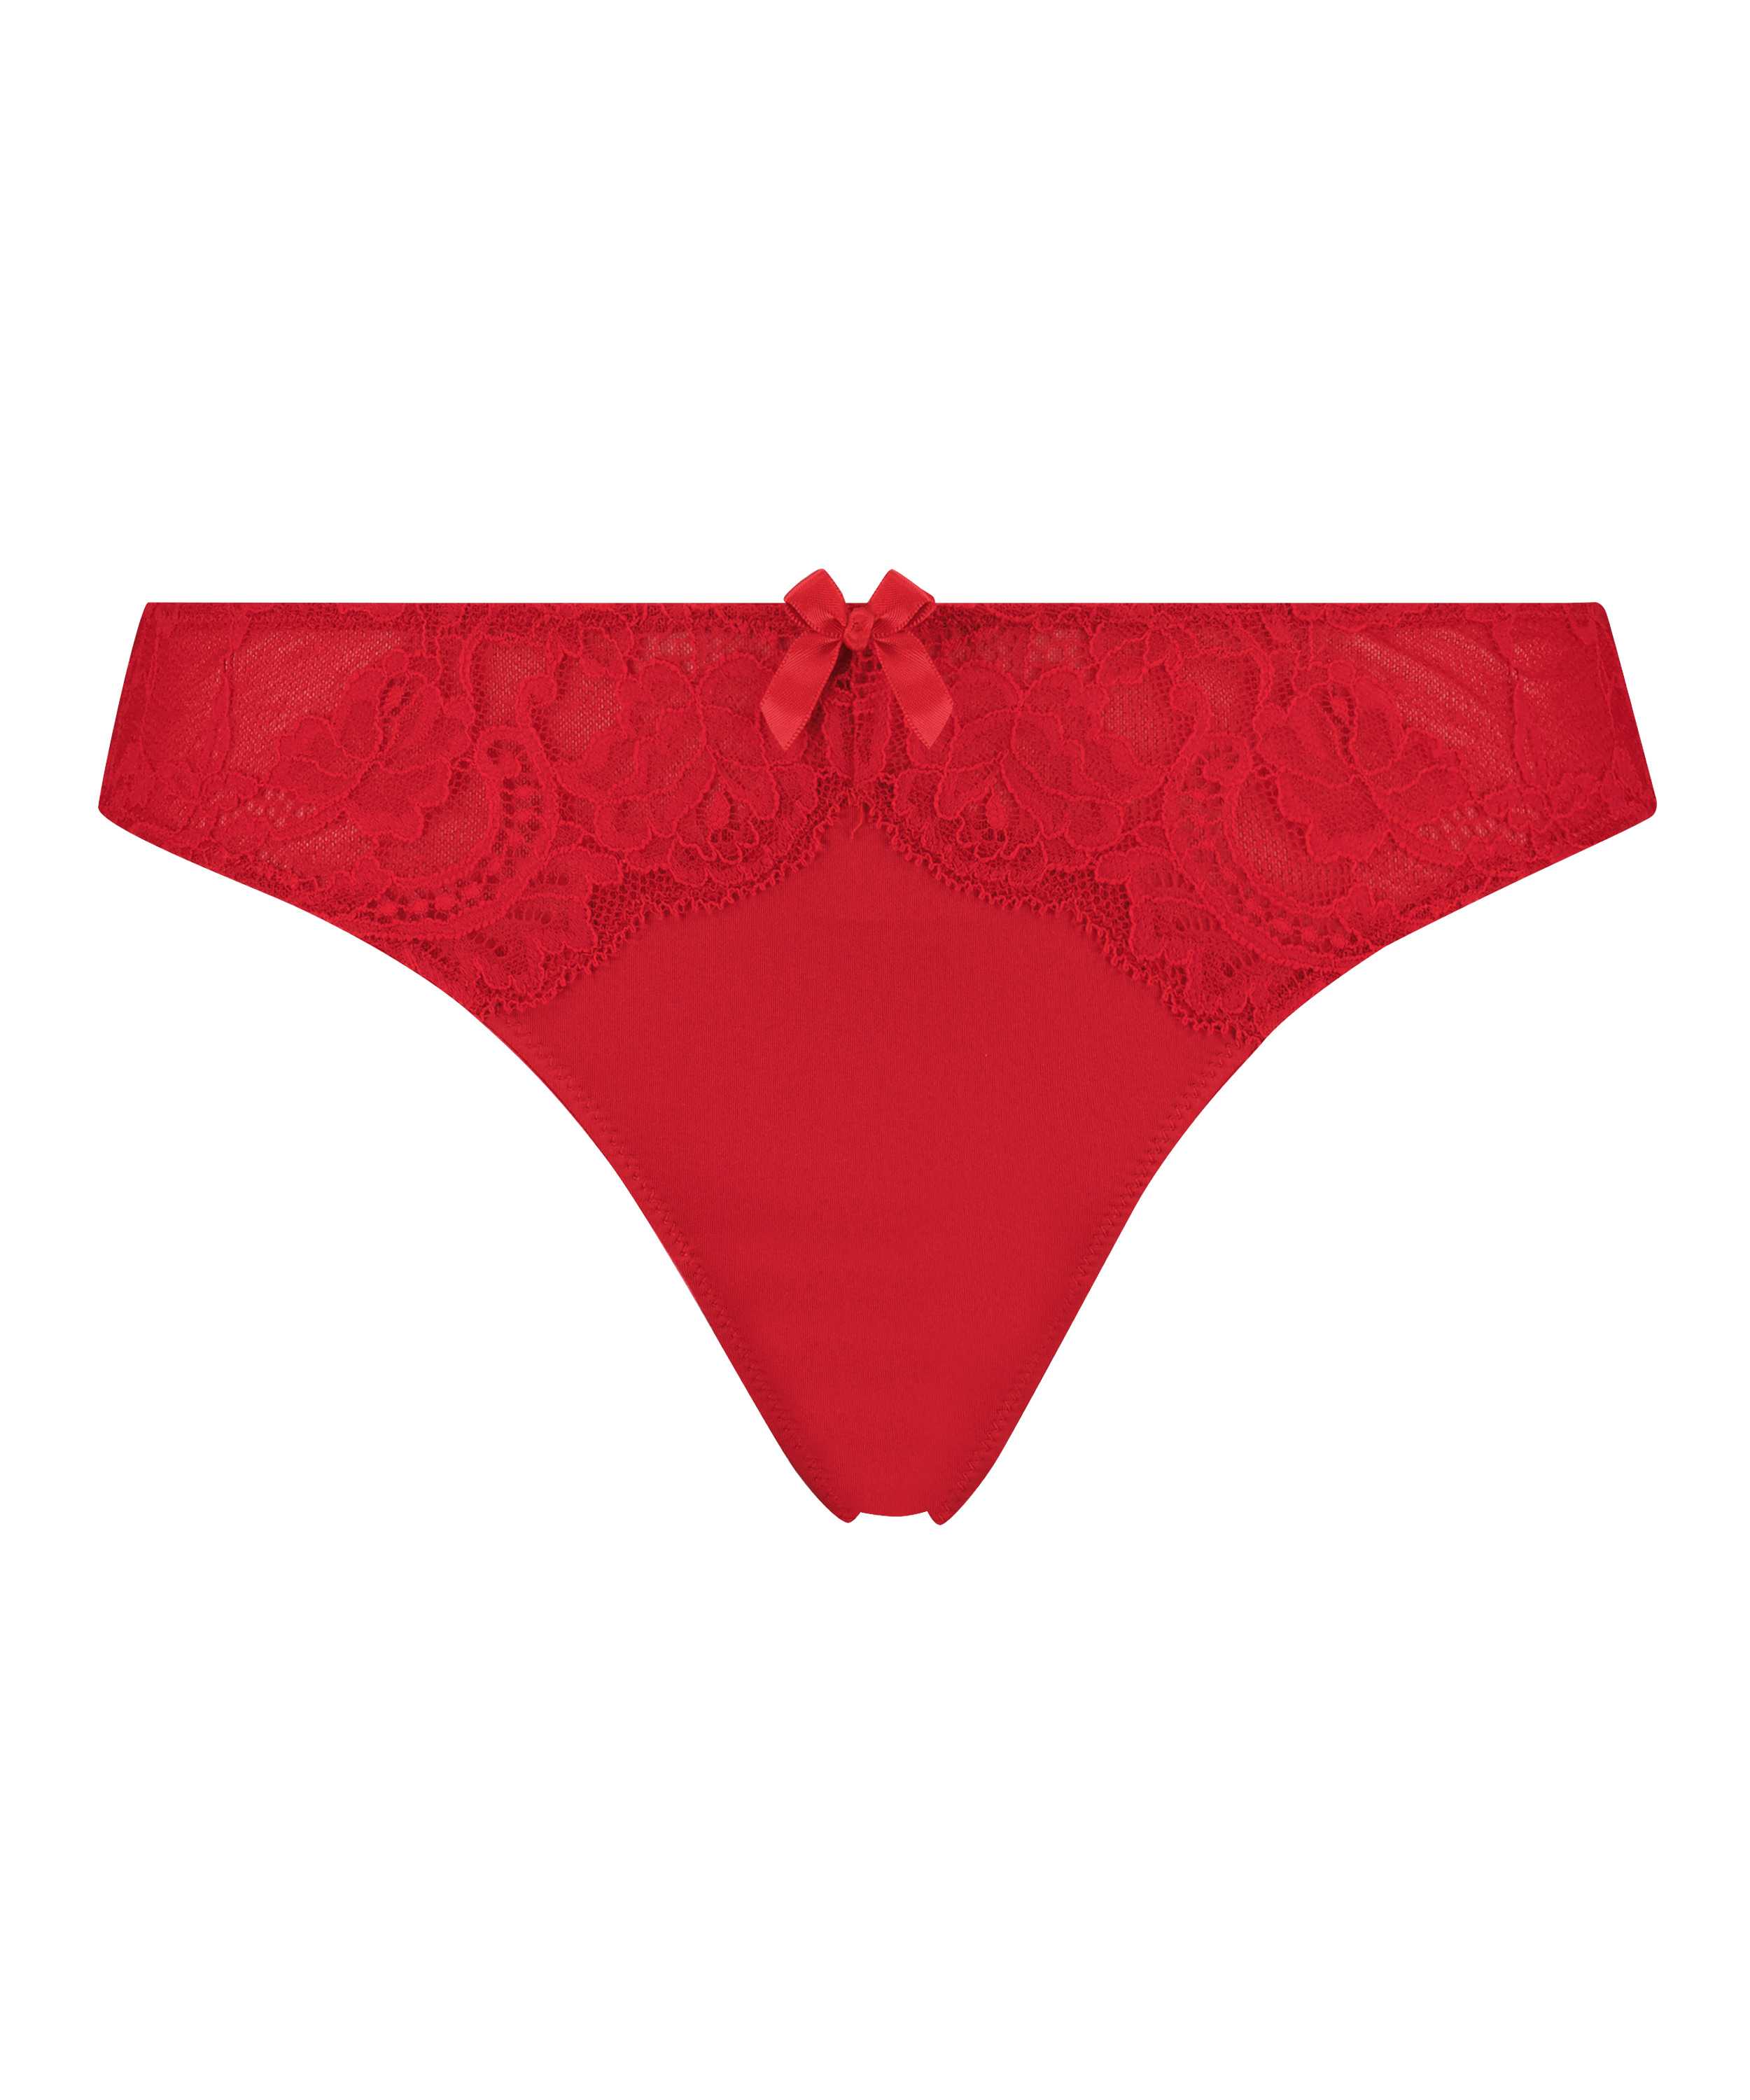 Teddy Thong, Red, main